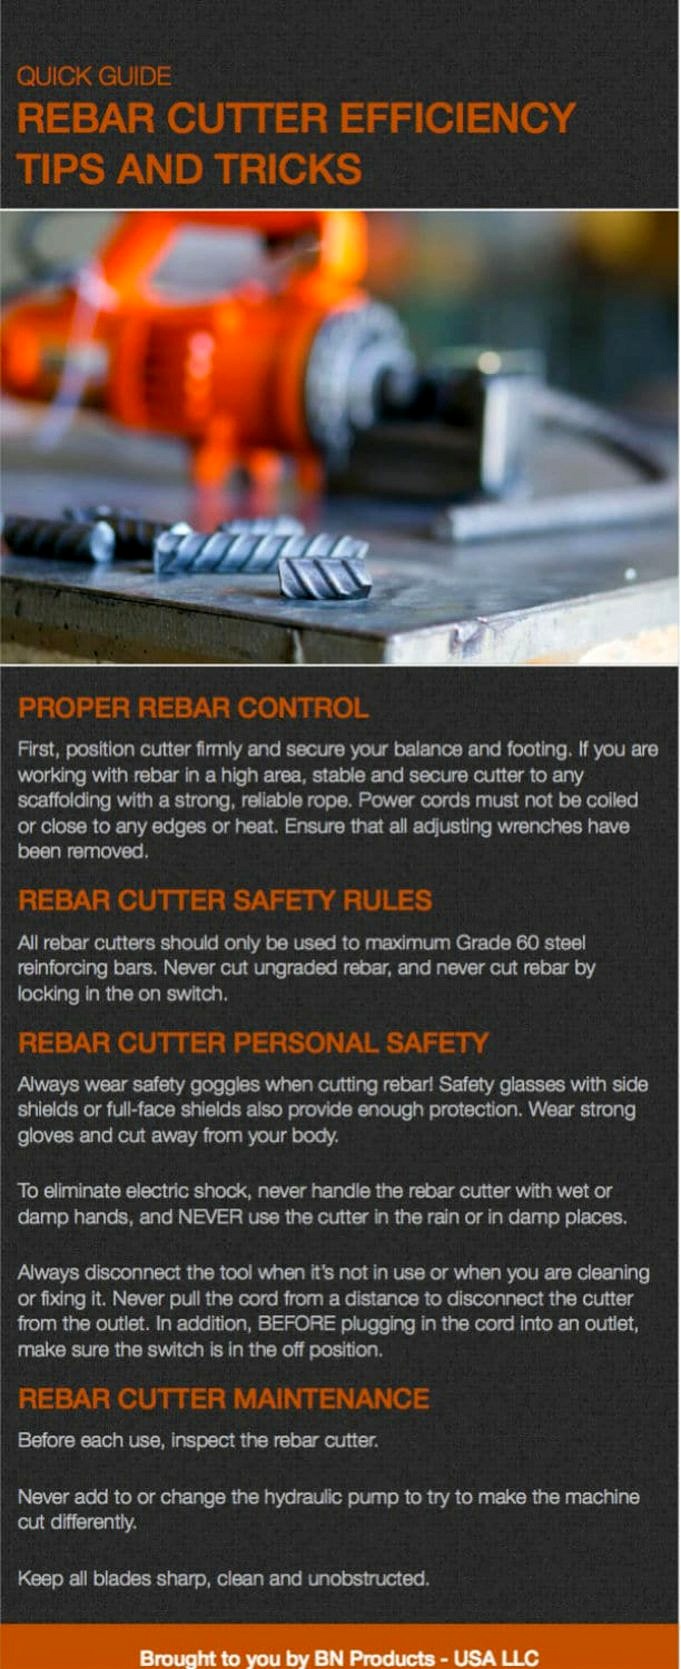 How To Cut Rebar With Different Tools